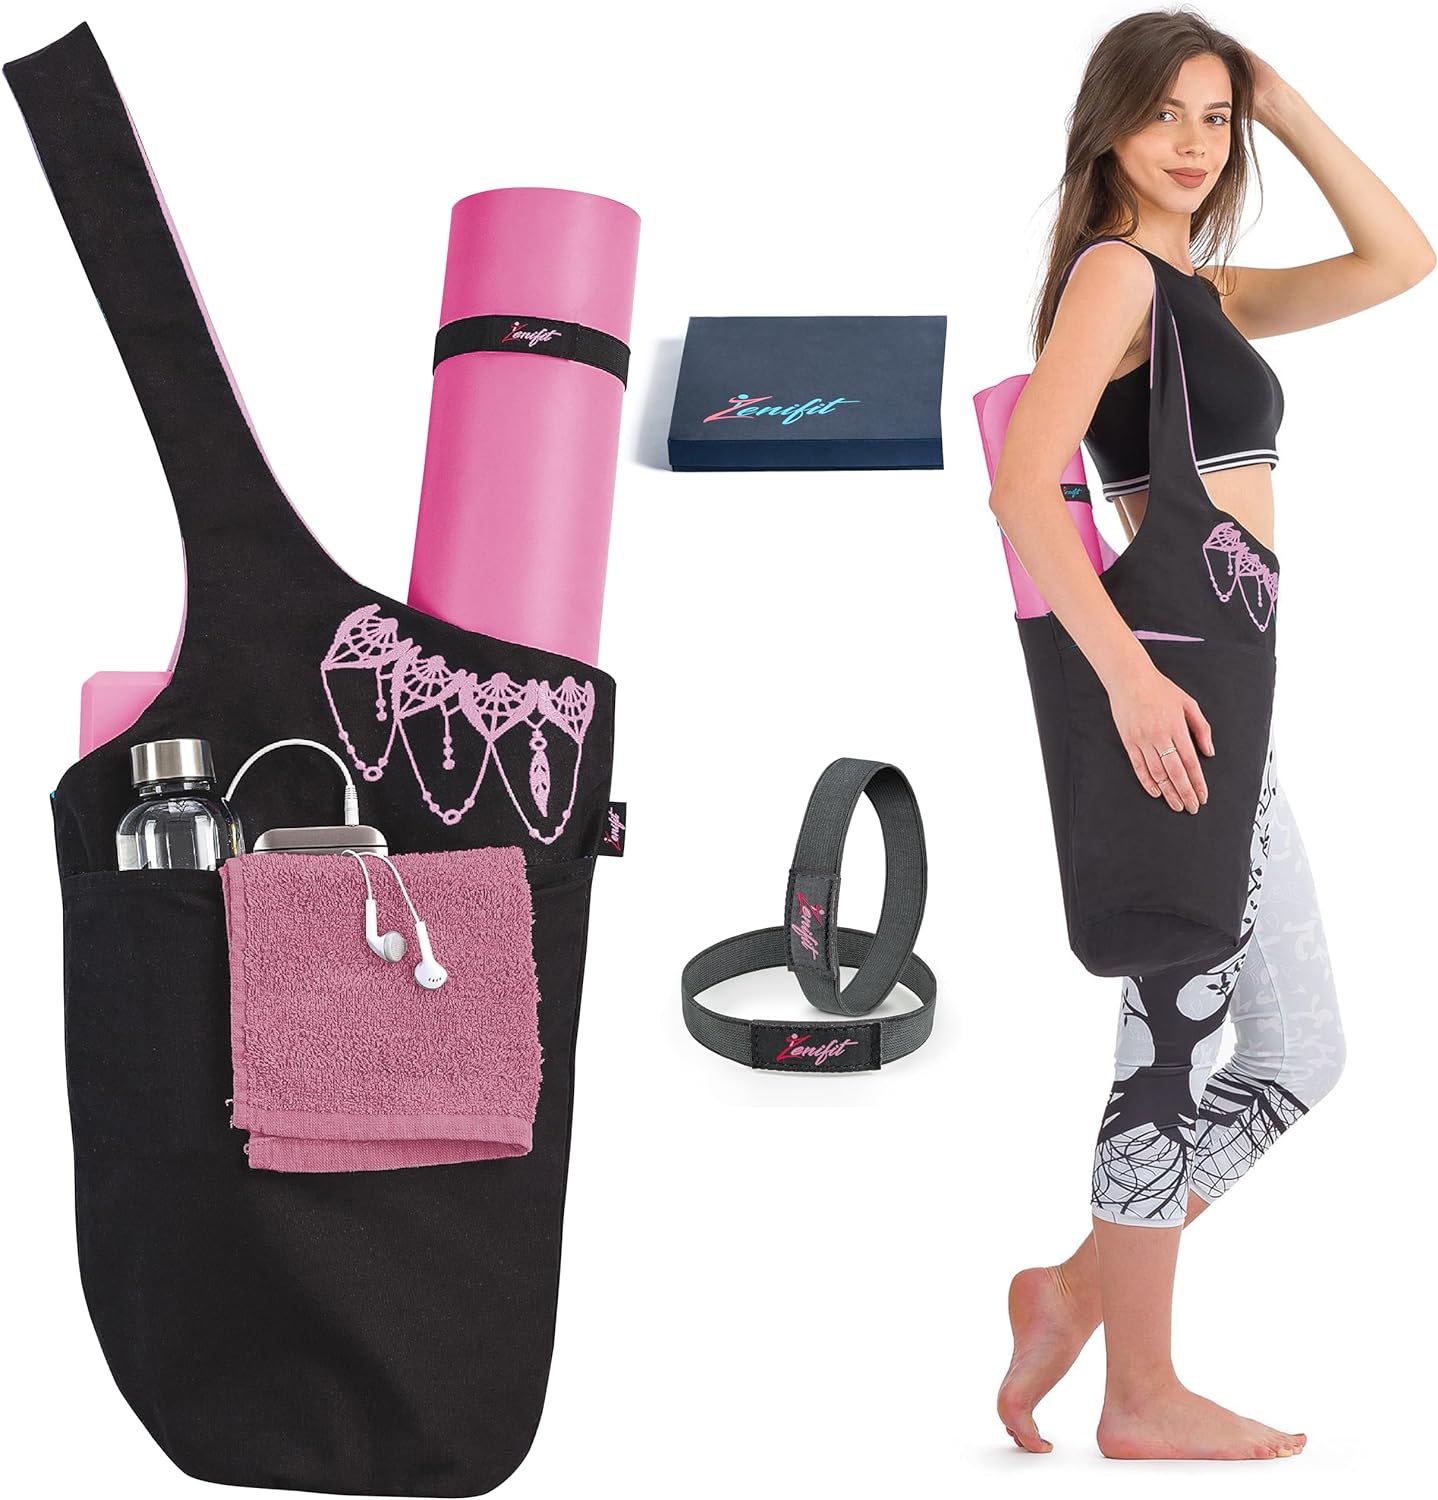 Yoga mat bag black and pink with accessories, gift box and elastics, women wearing yoga bag on shoulder